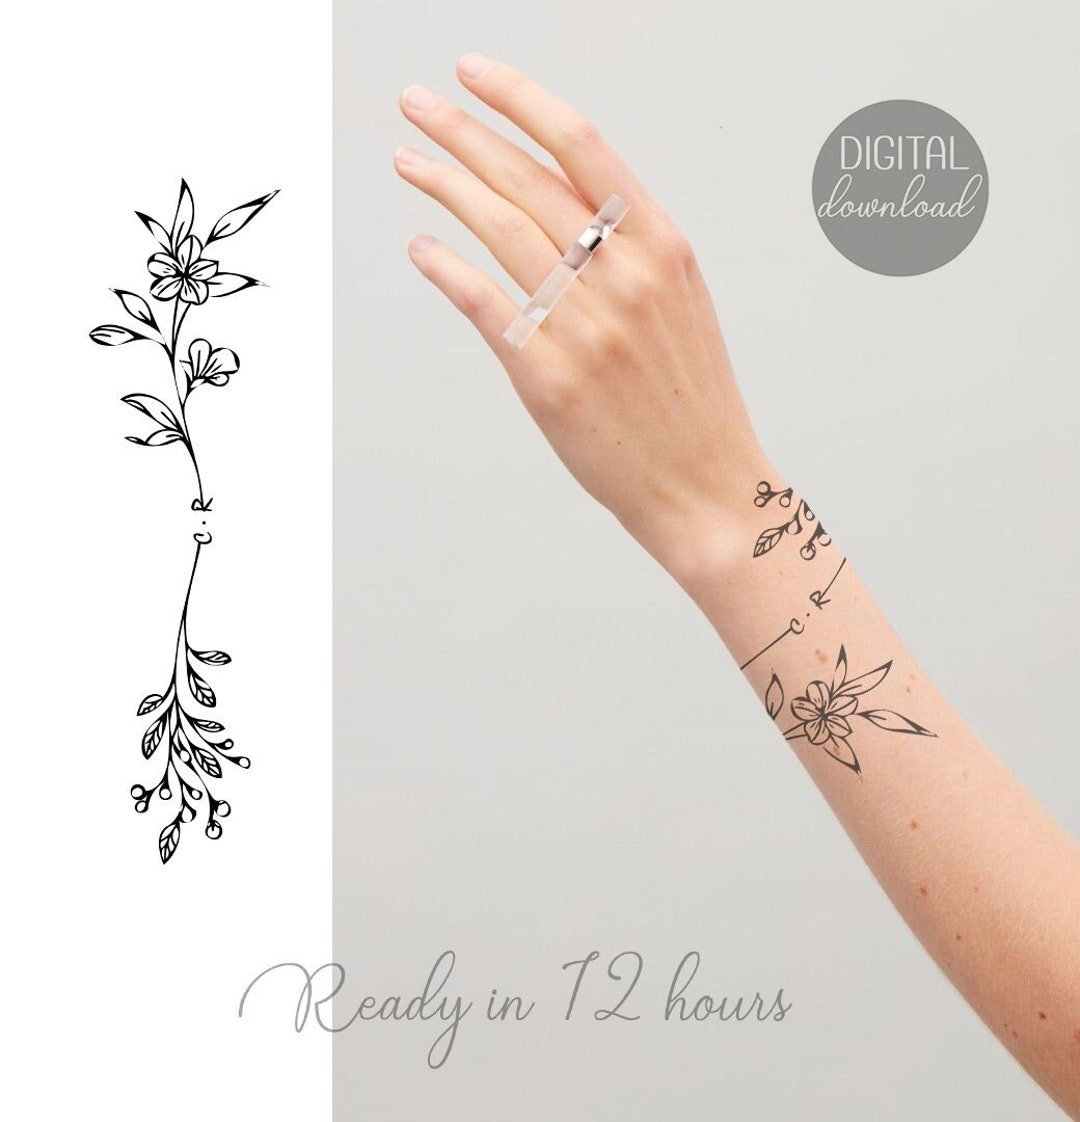 100+ Tiny, Chic Wrist Tattoos That Are Better Than a Bracelet | Tiny wrist  tattoos, Small wrist tattoos, Tiny tattoos for women